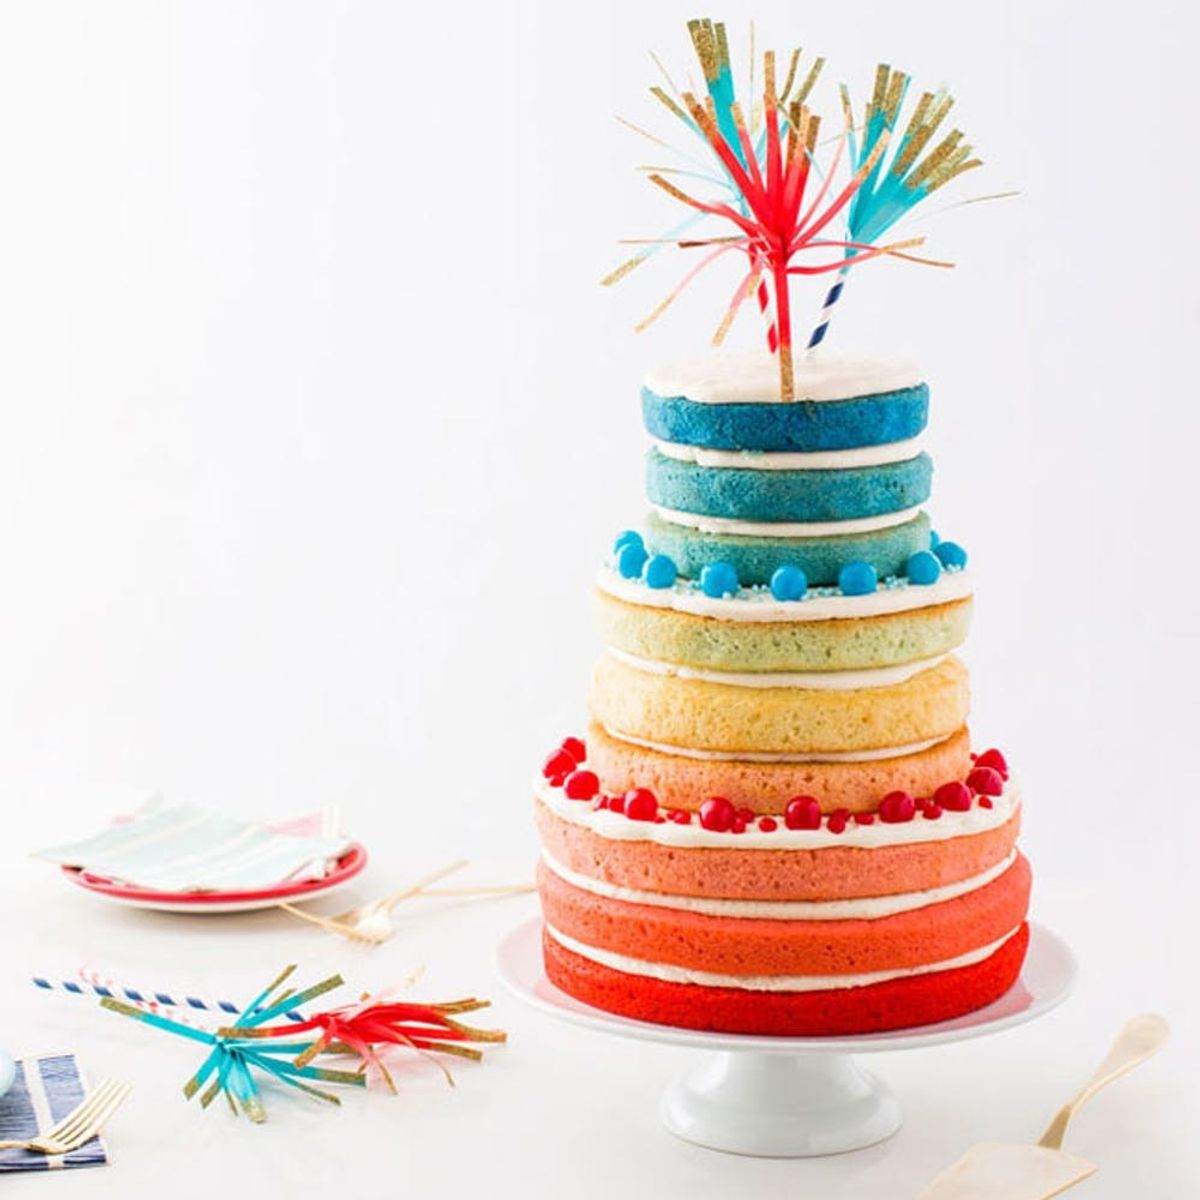 Your Friends Will Freak Over This Epic 9-Layer Red, White and Blue Cake Recipe